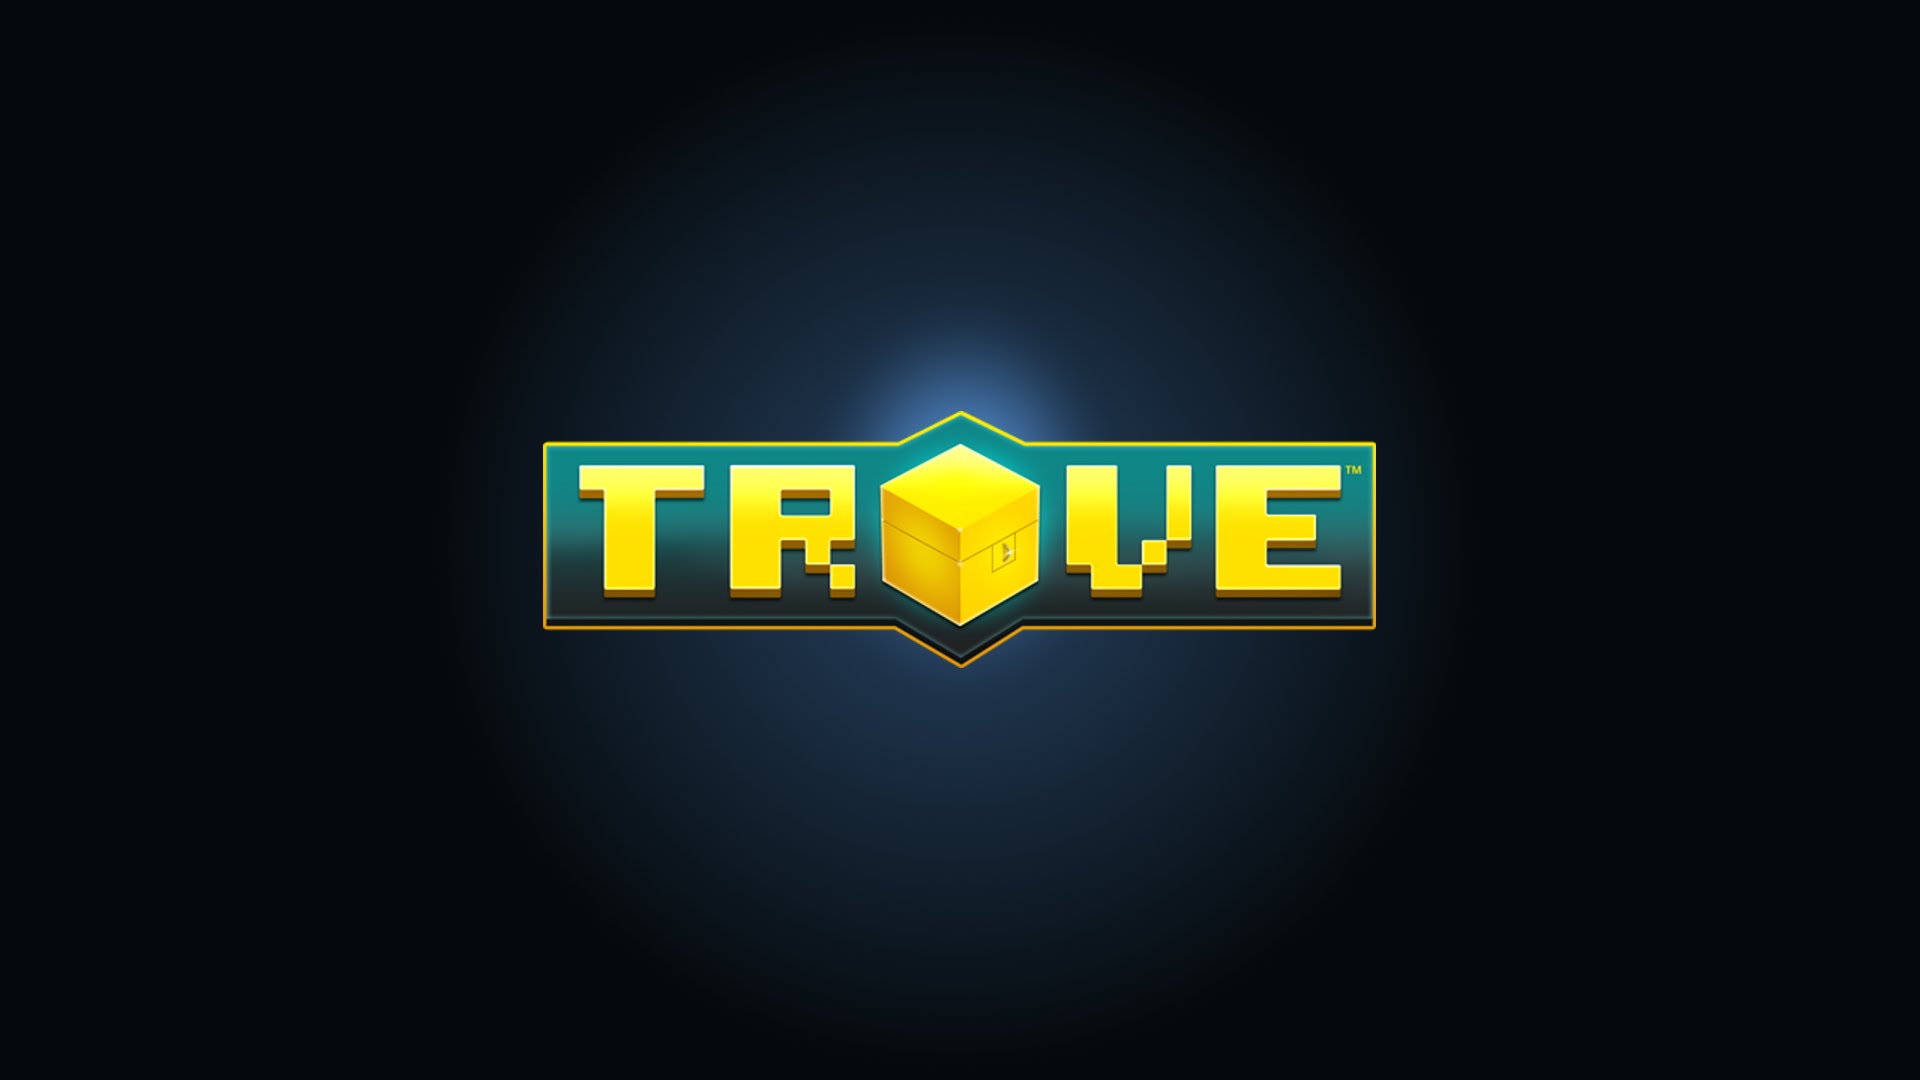 Steam Munity Guide All Trove Wallpaper Available In HD